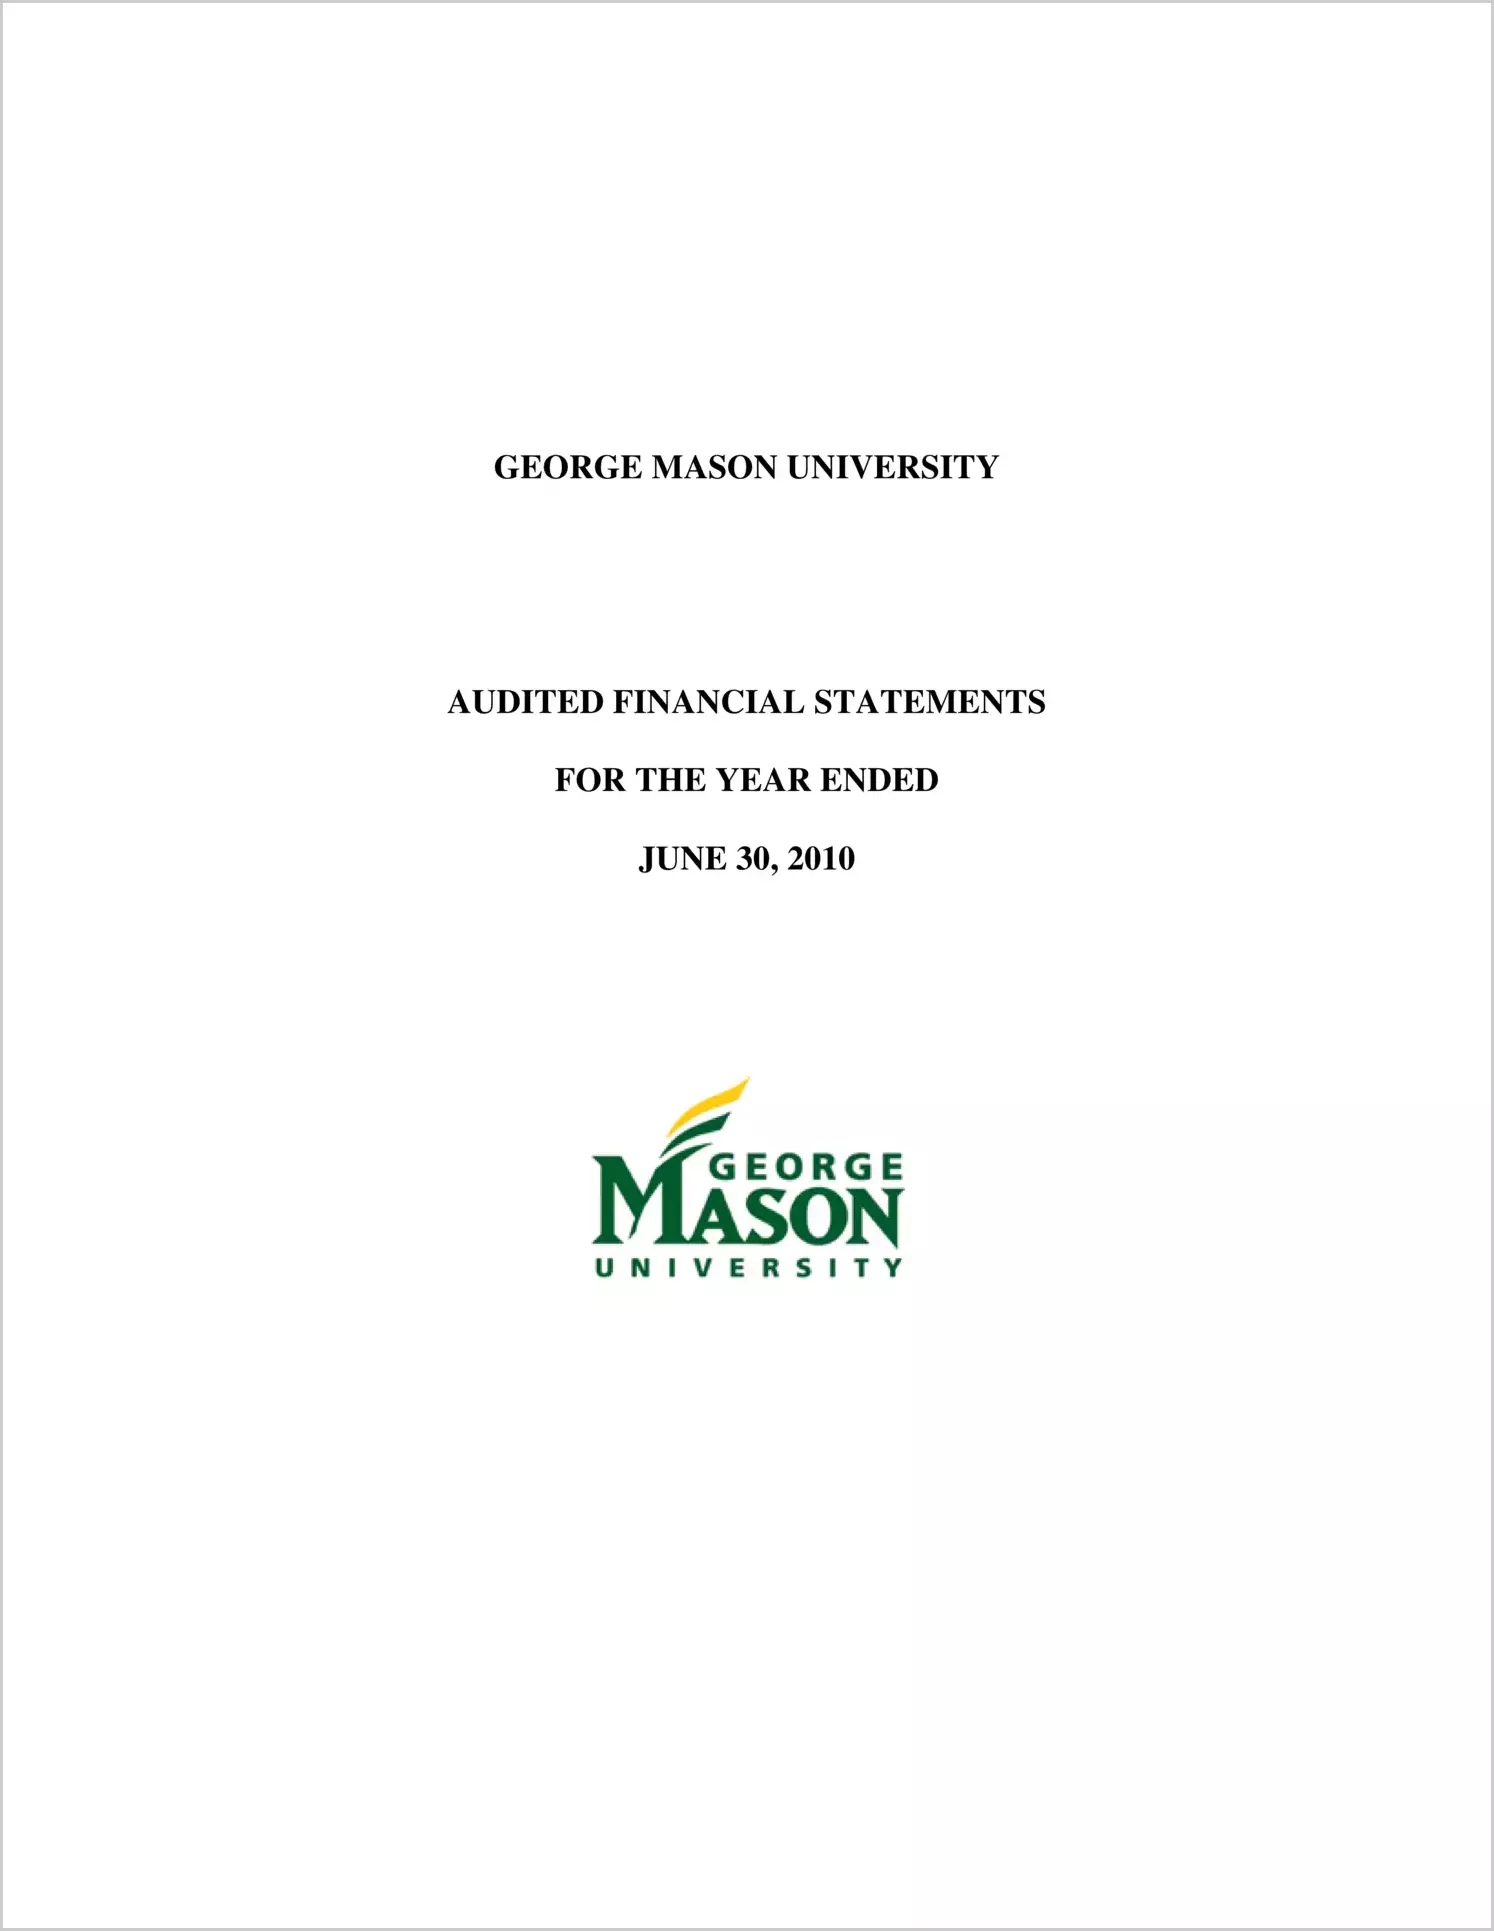 George Mason University Financial Statements for the year ended June 30, 2010